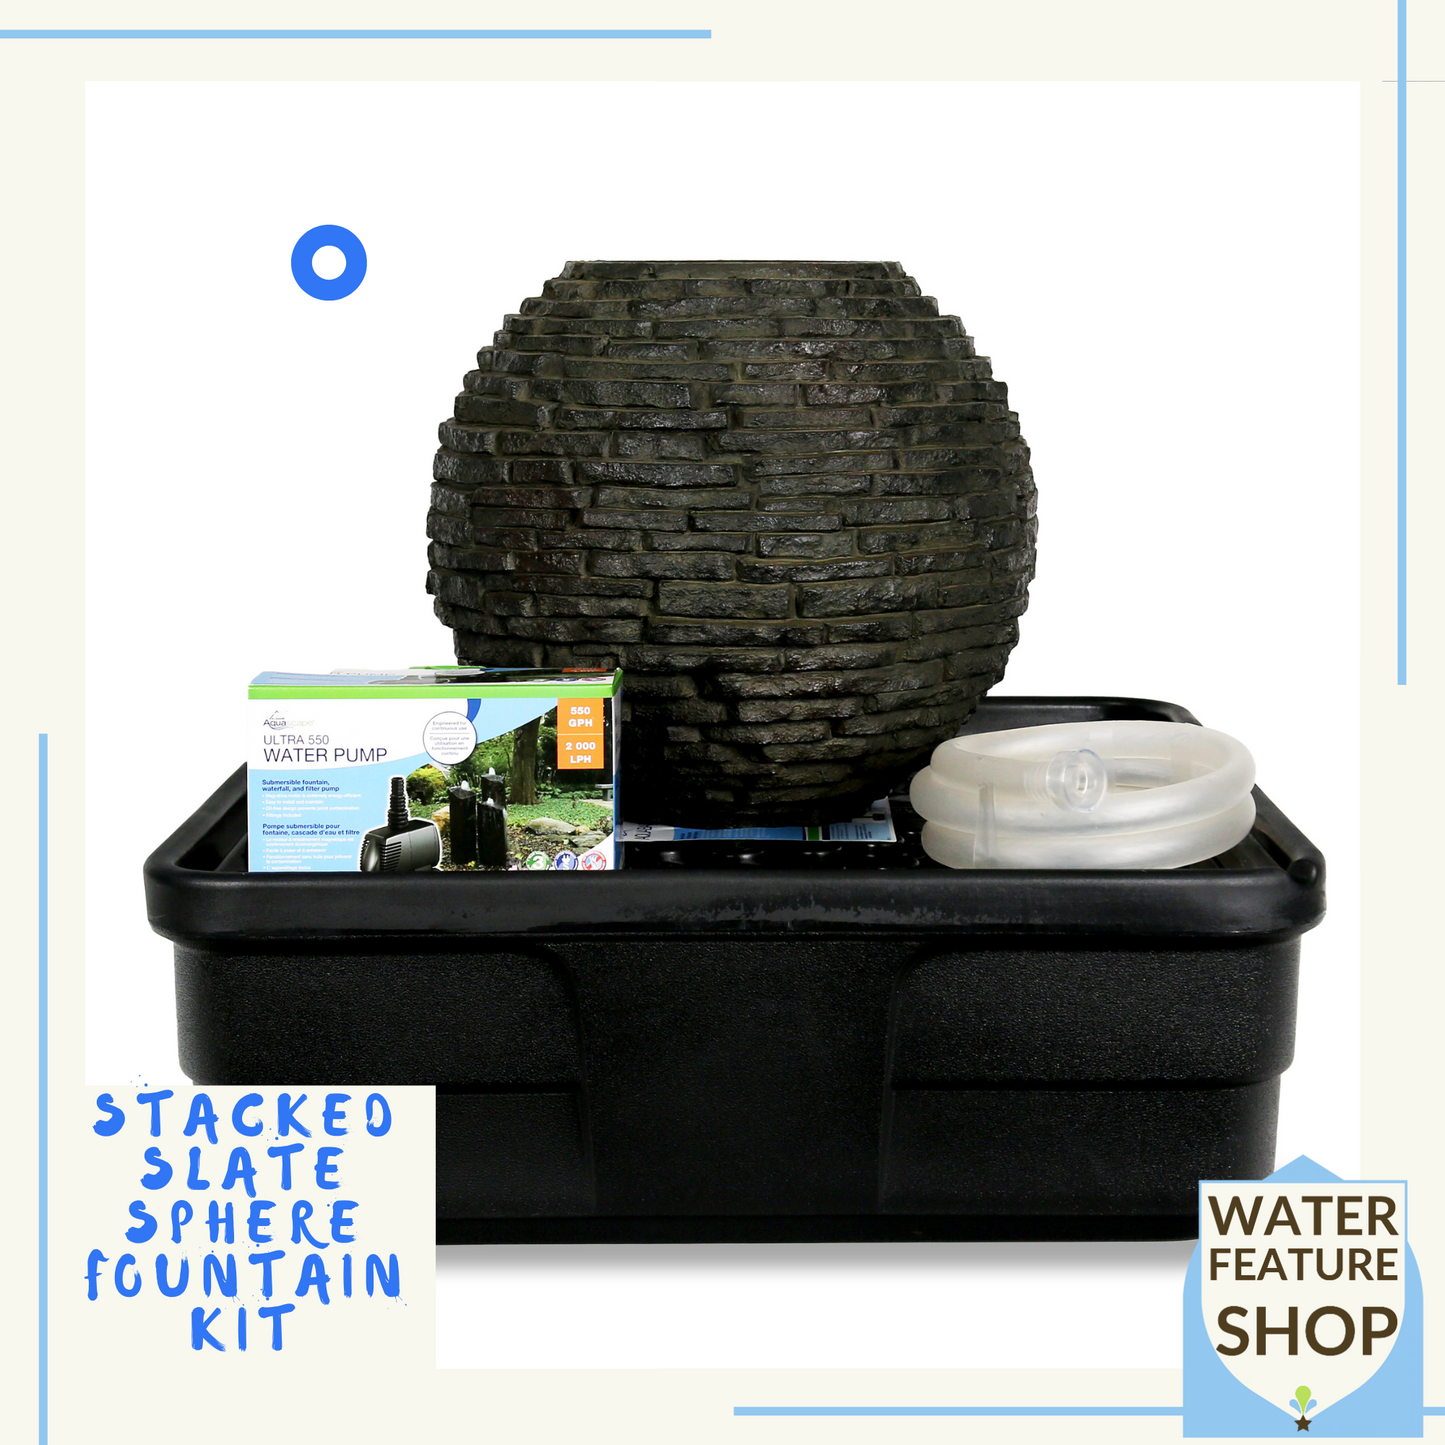 Stacked Slate Sphere Fountain kit - Garden Water Feature